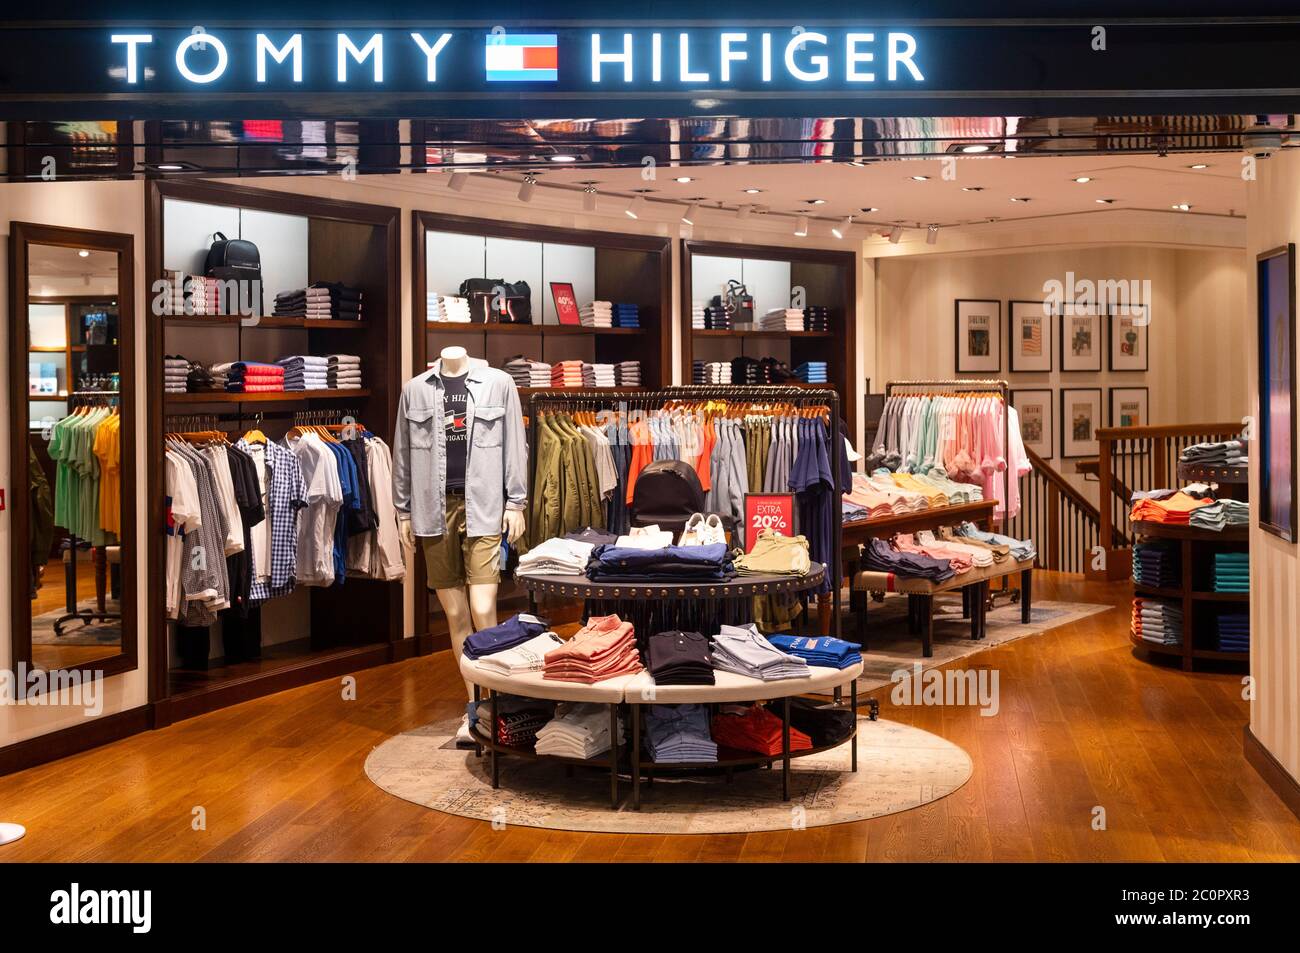 American multinational clothing fashion brand Tommy Hilfiger store seen in  Hong Kong Stock Photo - Alamy